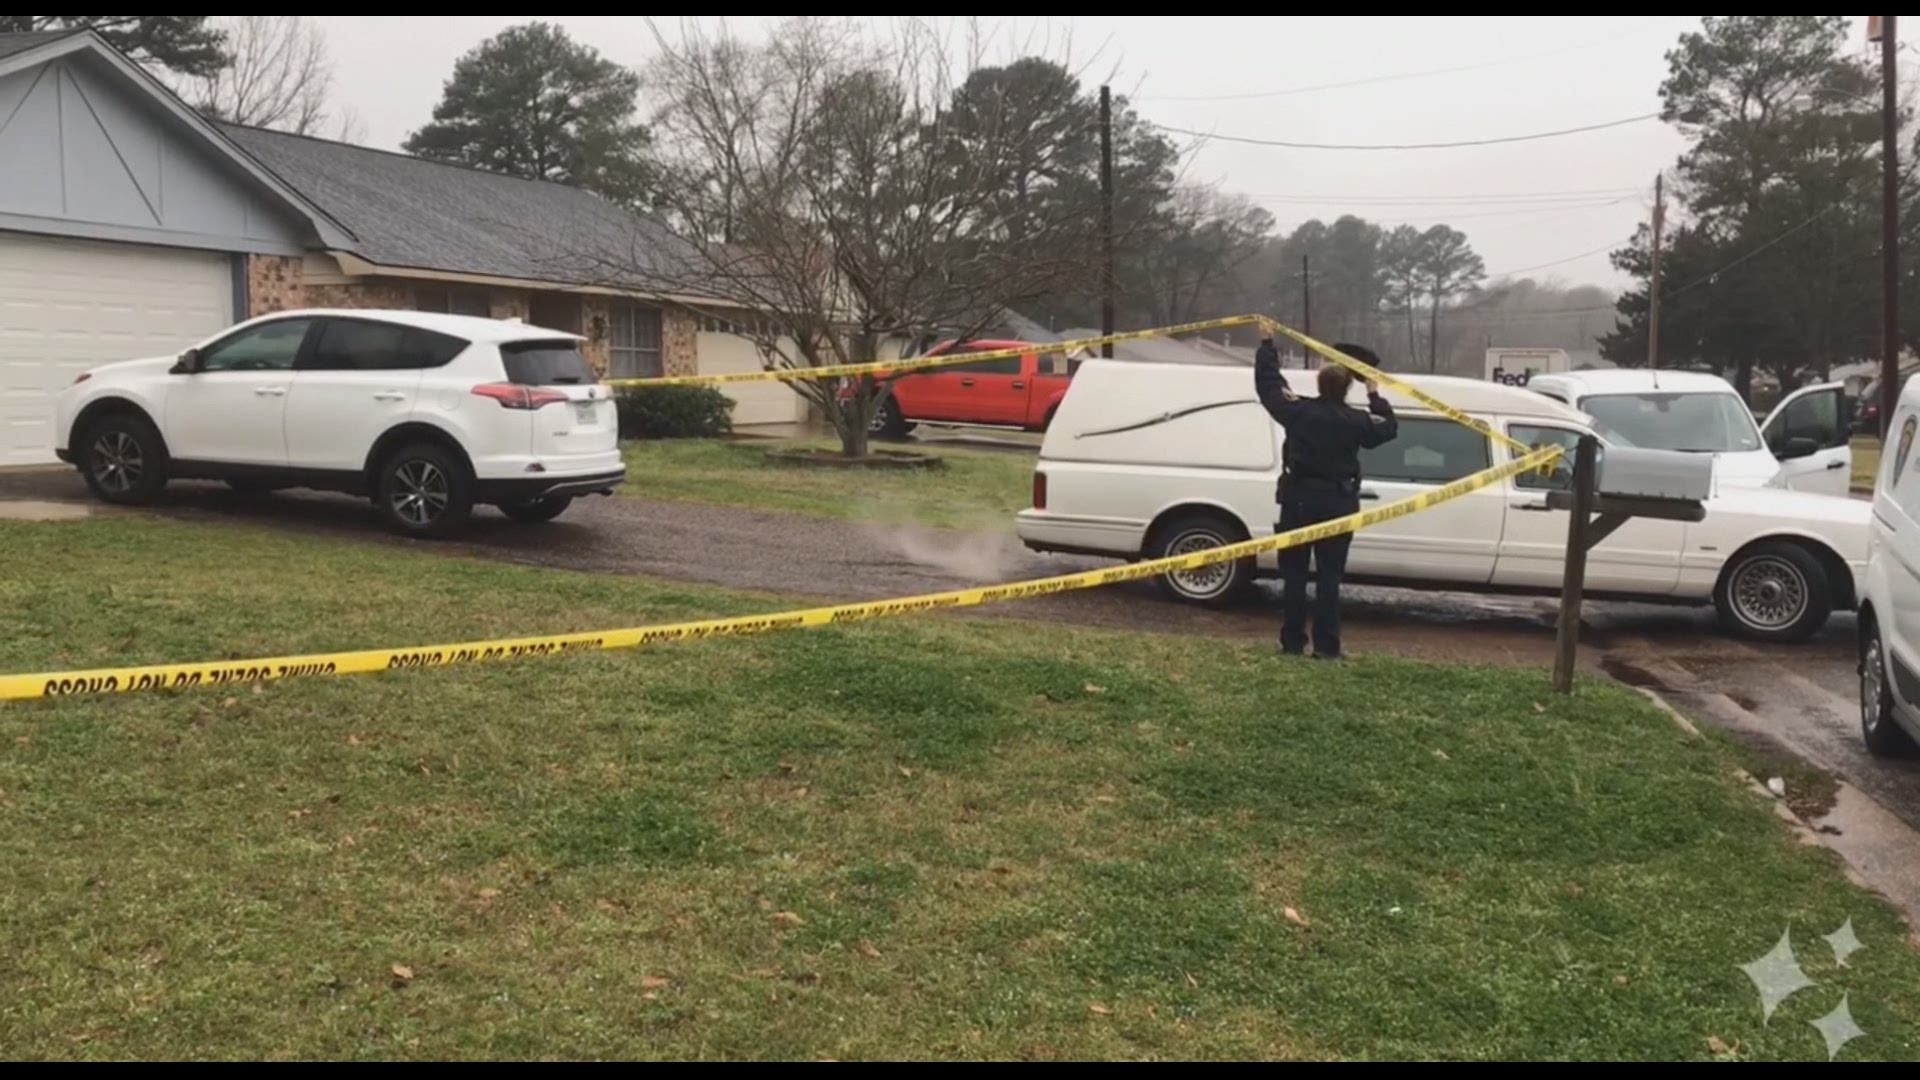 The Longview Police Department has arrested a person they believe was involved in the overnight fatal shooting of two women at a house on Loring Lane.